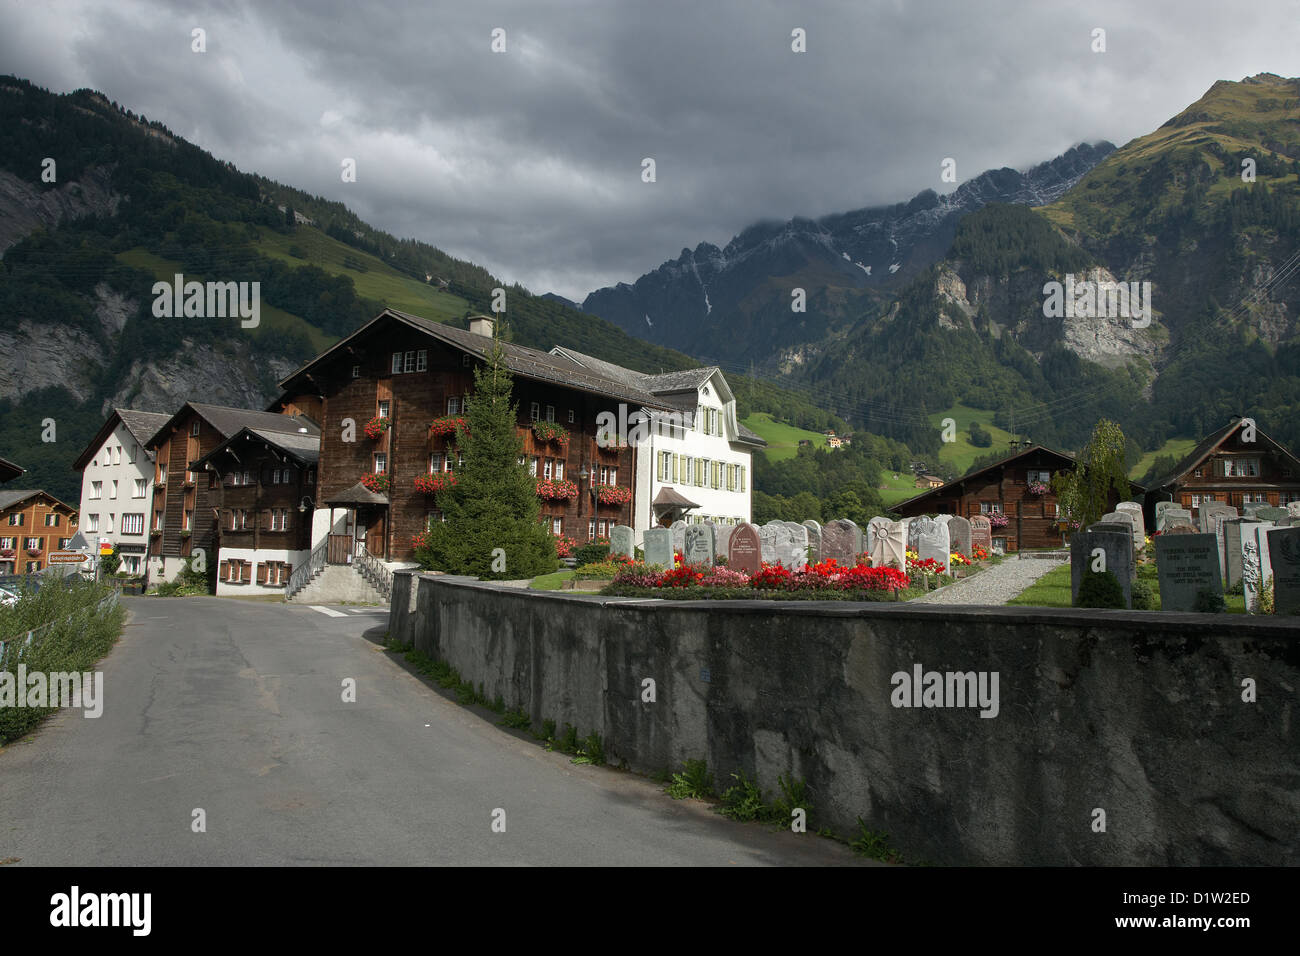 Elm Switzerland High Resolution Stock Photography and Images - Alamy